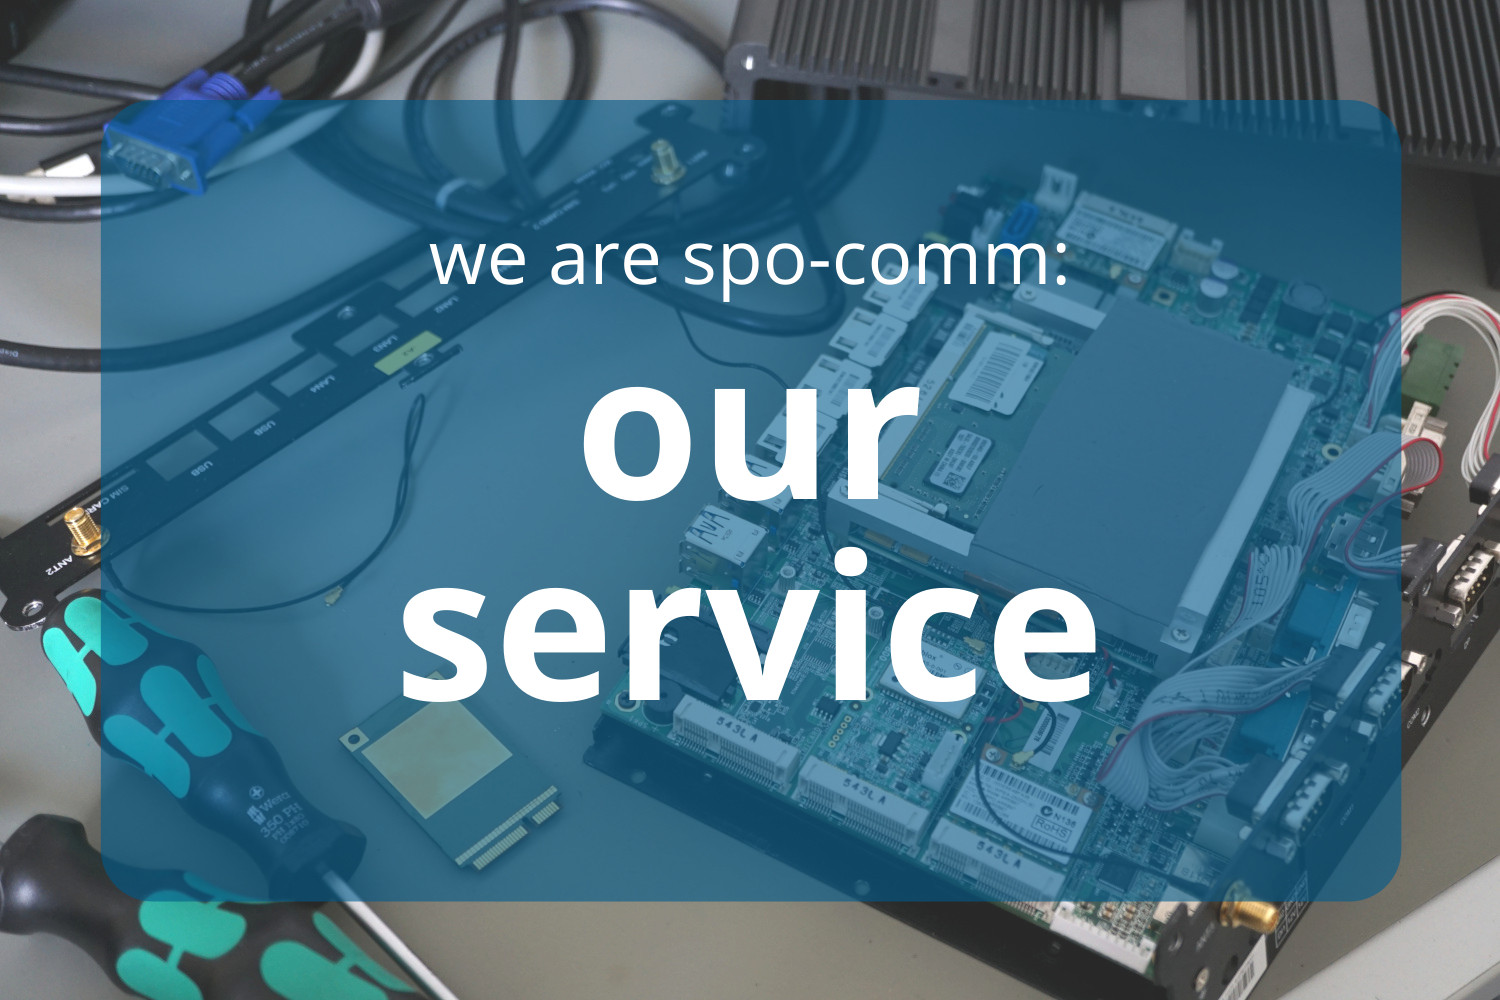 More than just support: Our service department